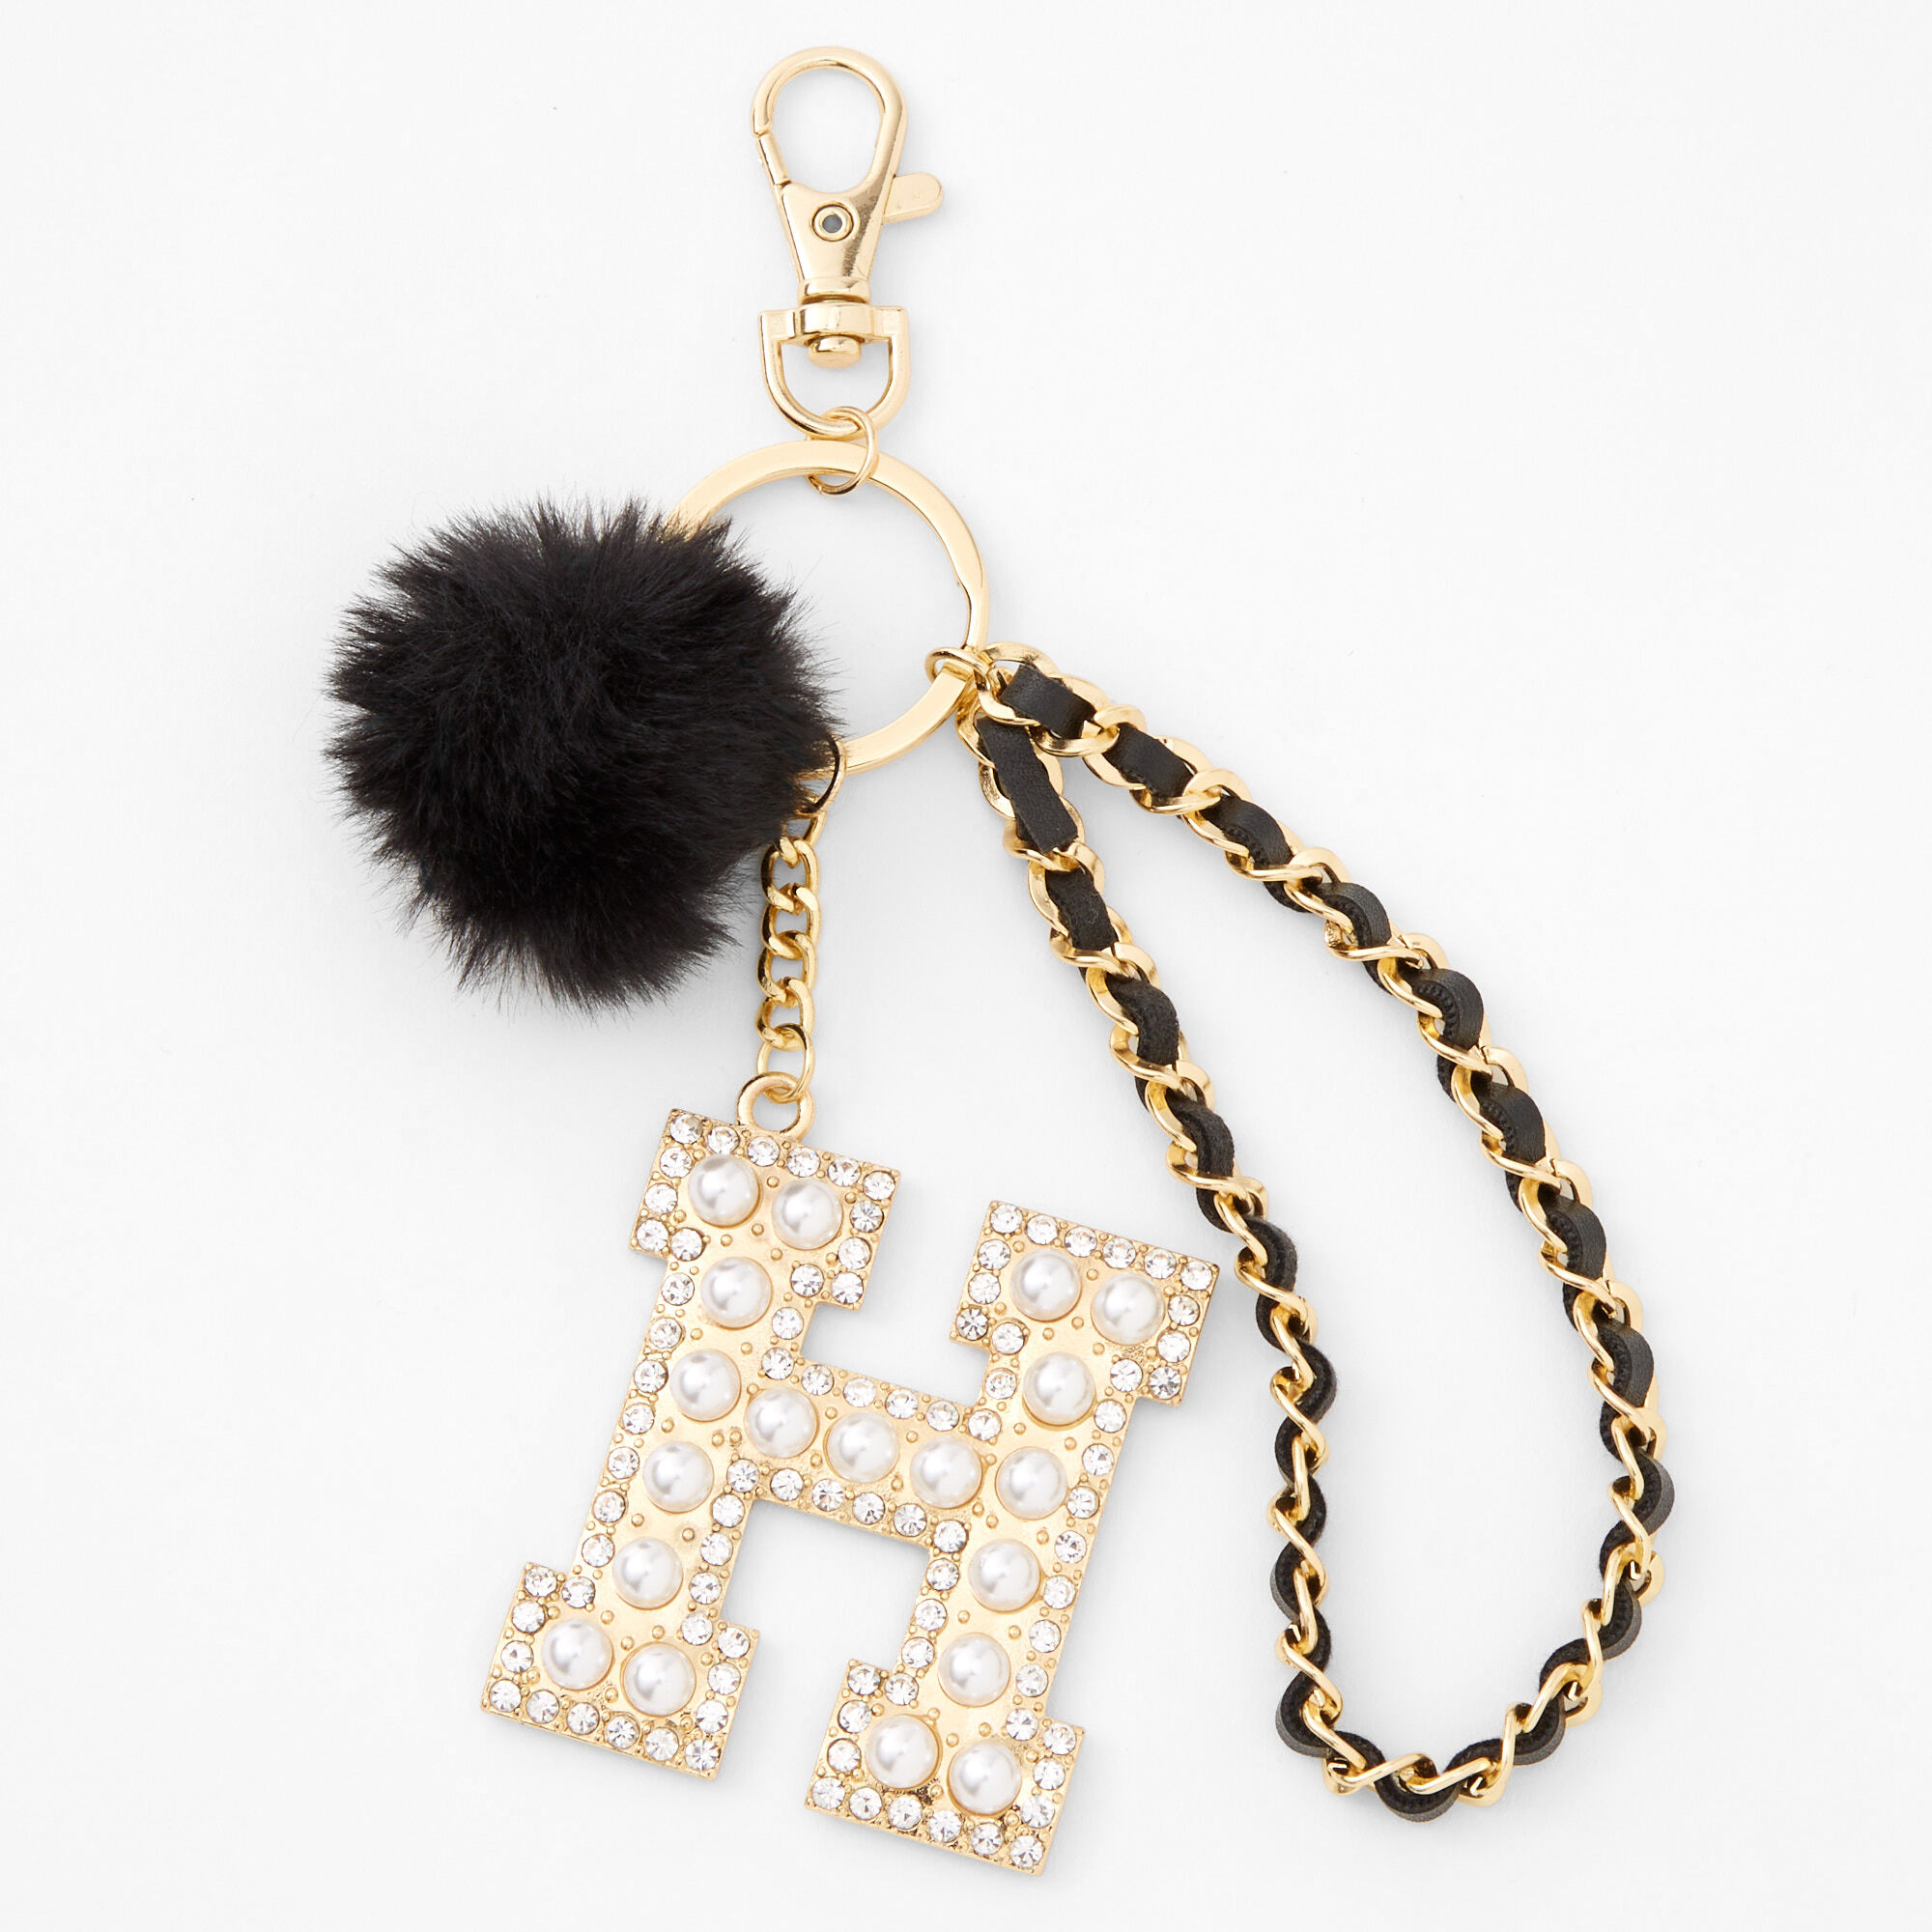 Shining crown Pom Pom Keychain, Backpack Charms, Keychains for Women at   Women's Clothing store